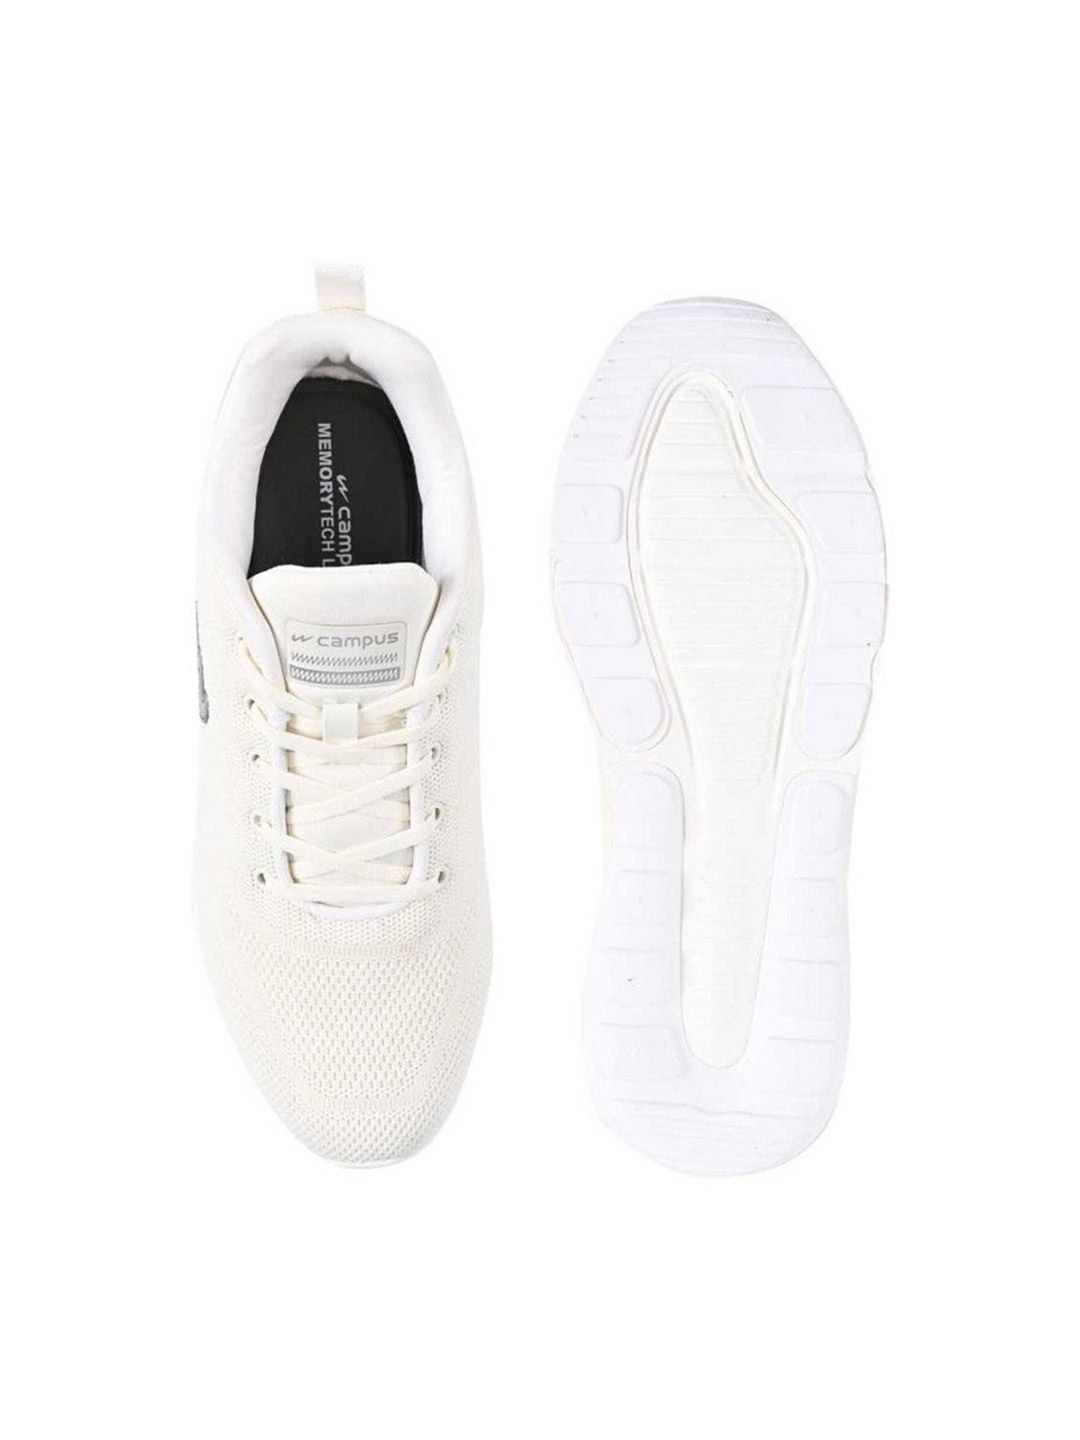 Buy Men North Plus Off White Running Shoes From Fancode Shop.